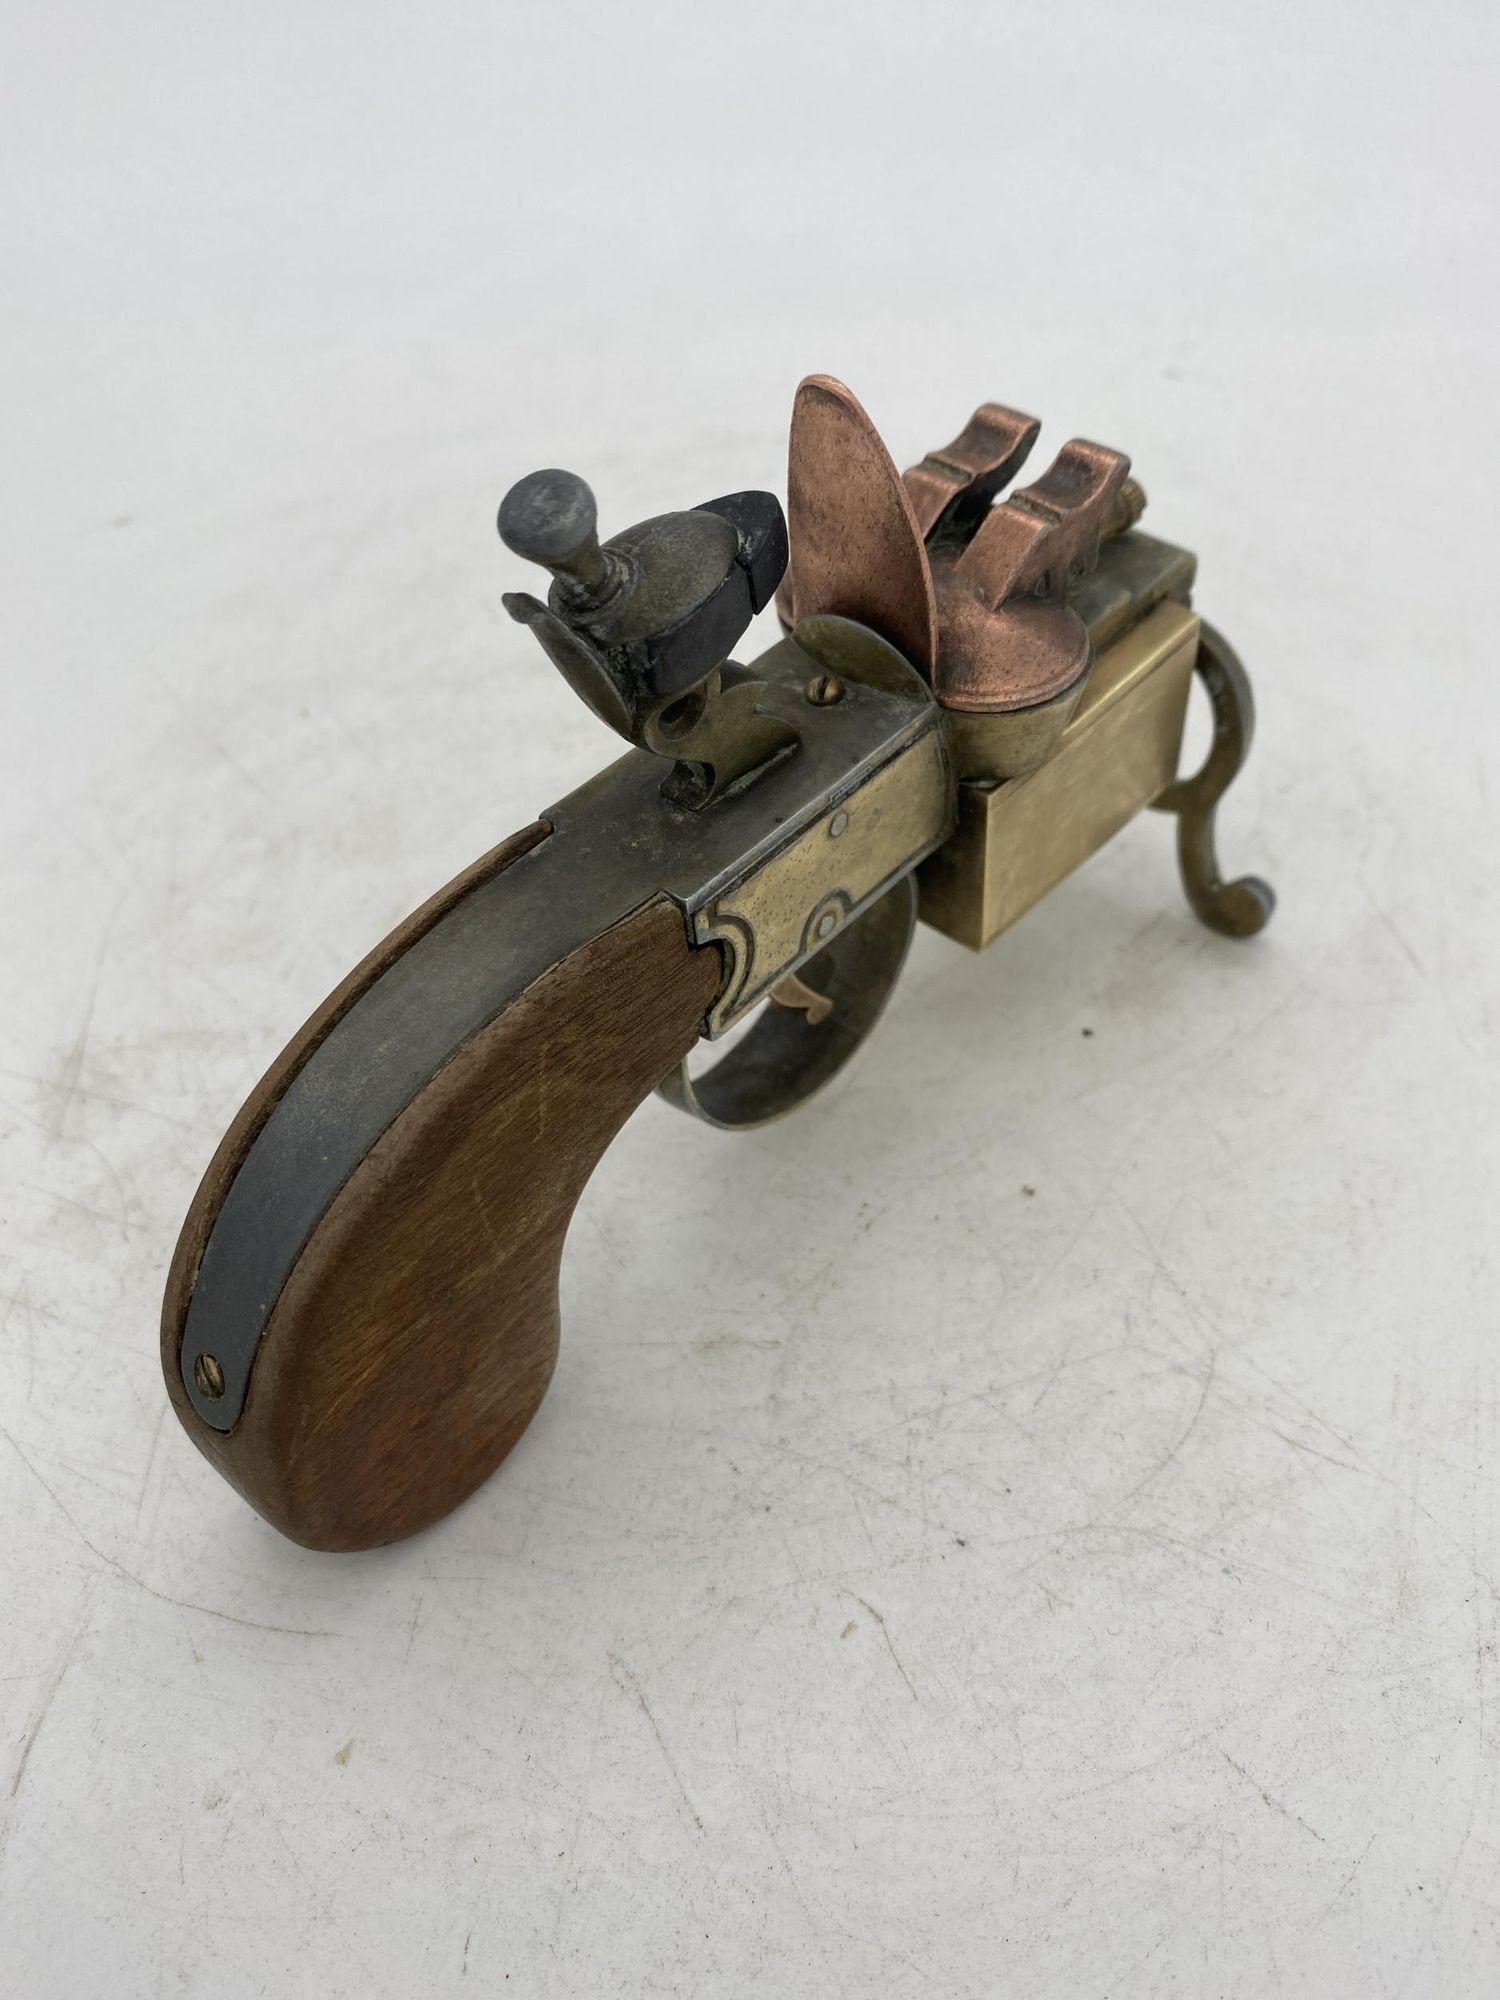 This Dunhill Tinder Pistol is a fine example of an extraordinary table lighter which is in the shape of a flintlock tinder (gun) pistol from the XVIII century.
It is made of brass and it has an antique brass finish and a nice oak slab handle